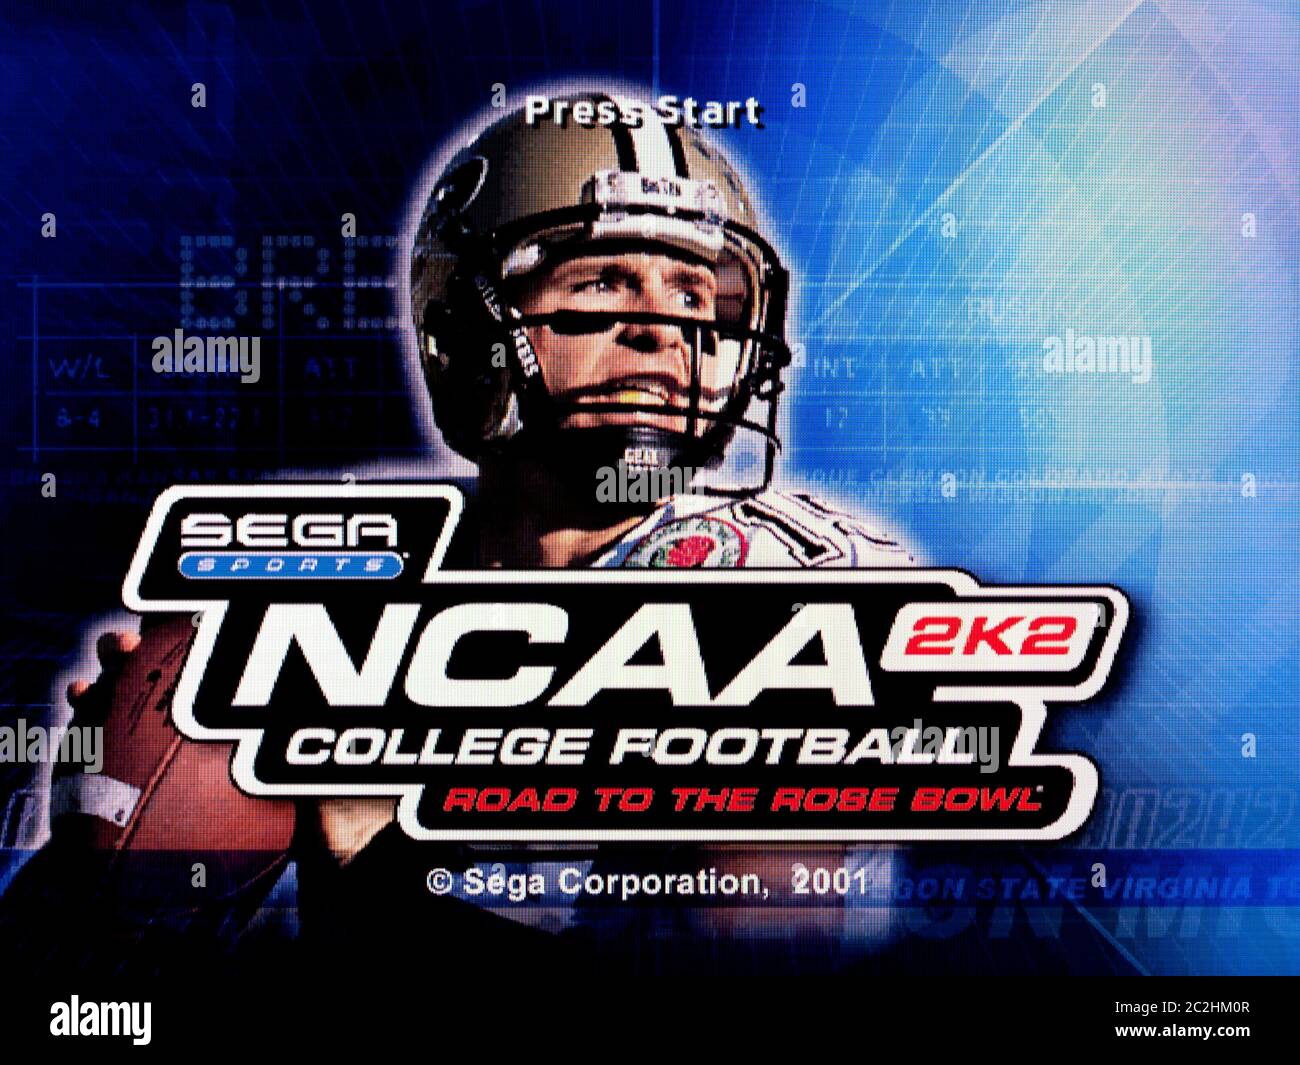 NCAA 2K2 College Football - Sega Dreamcast Videogame - Editorial use only Stock Photo